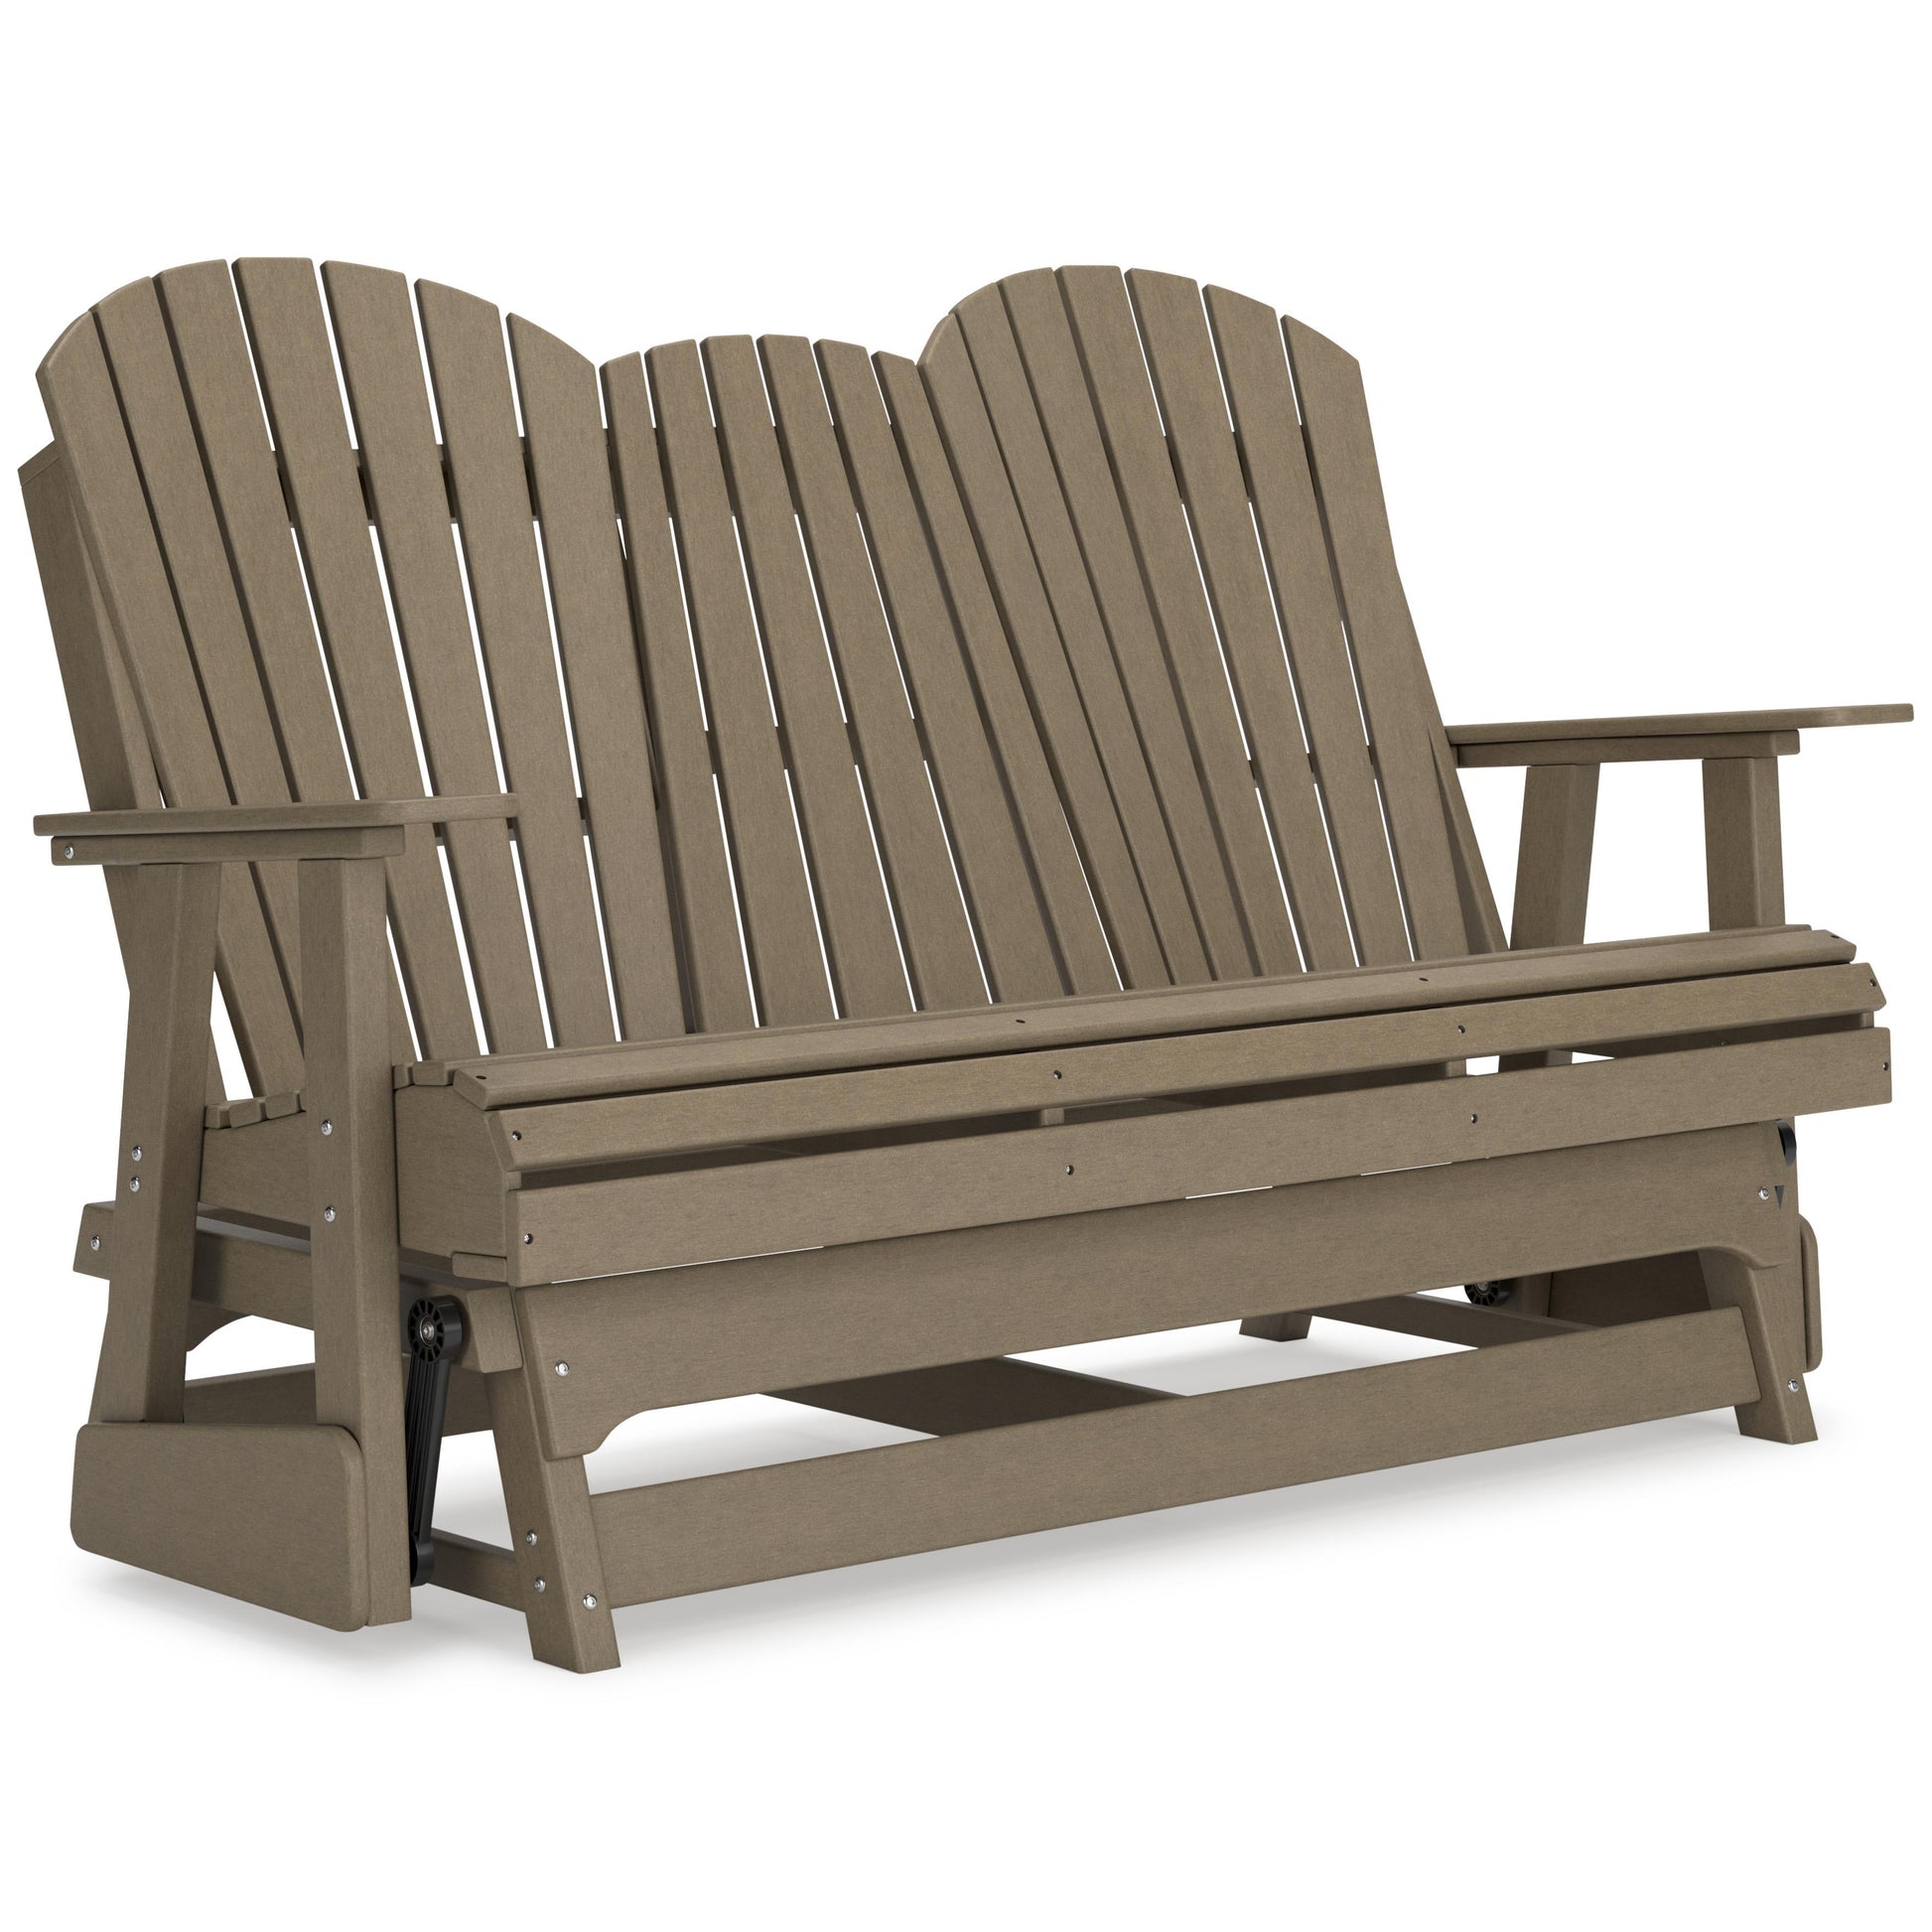 Signature Design by Ashley Outdoor Seating Loveseats P114-835 IMAGE 1